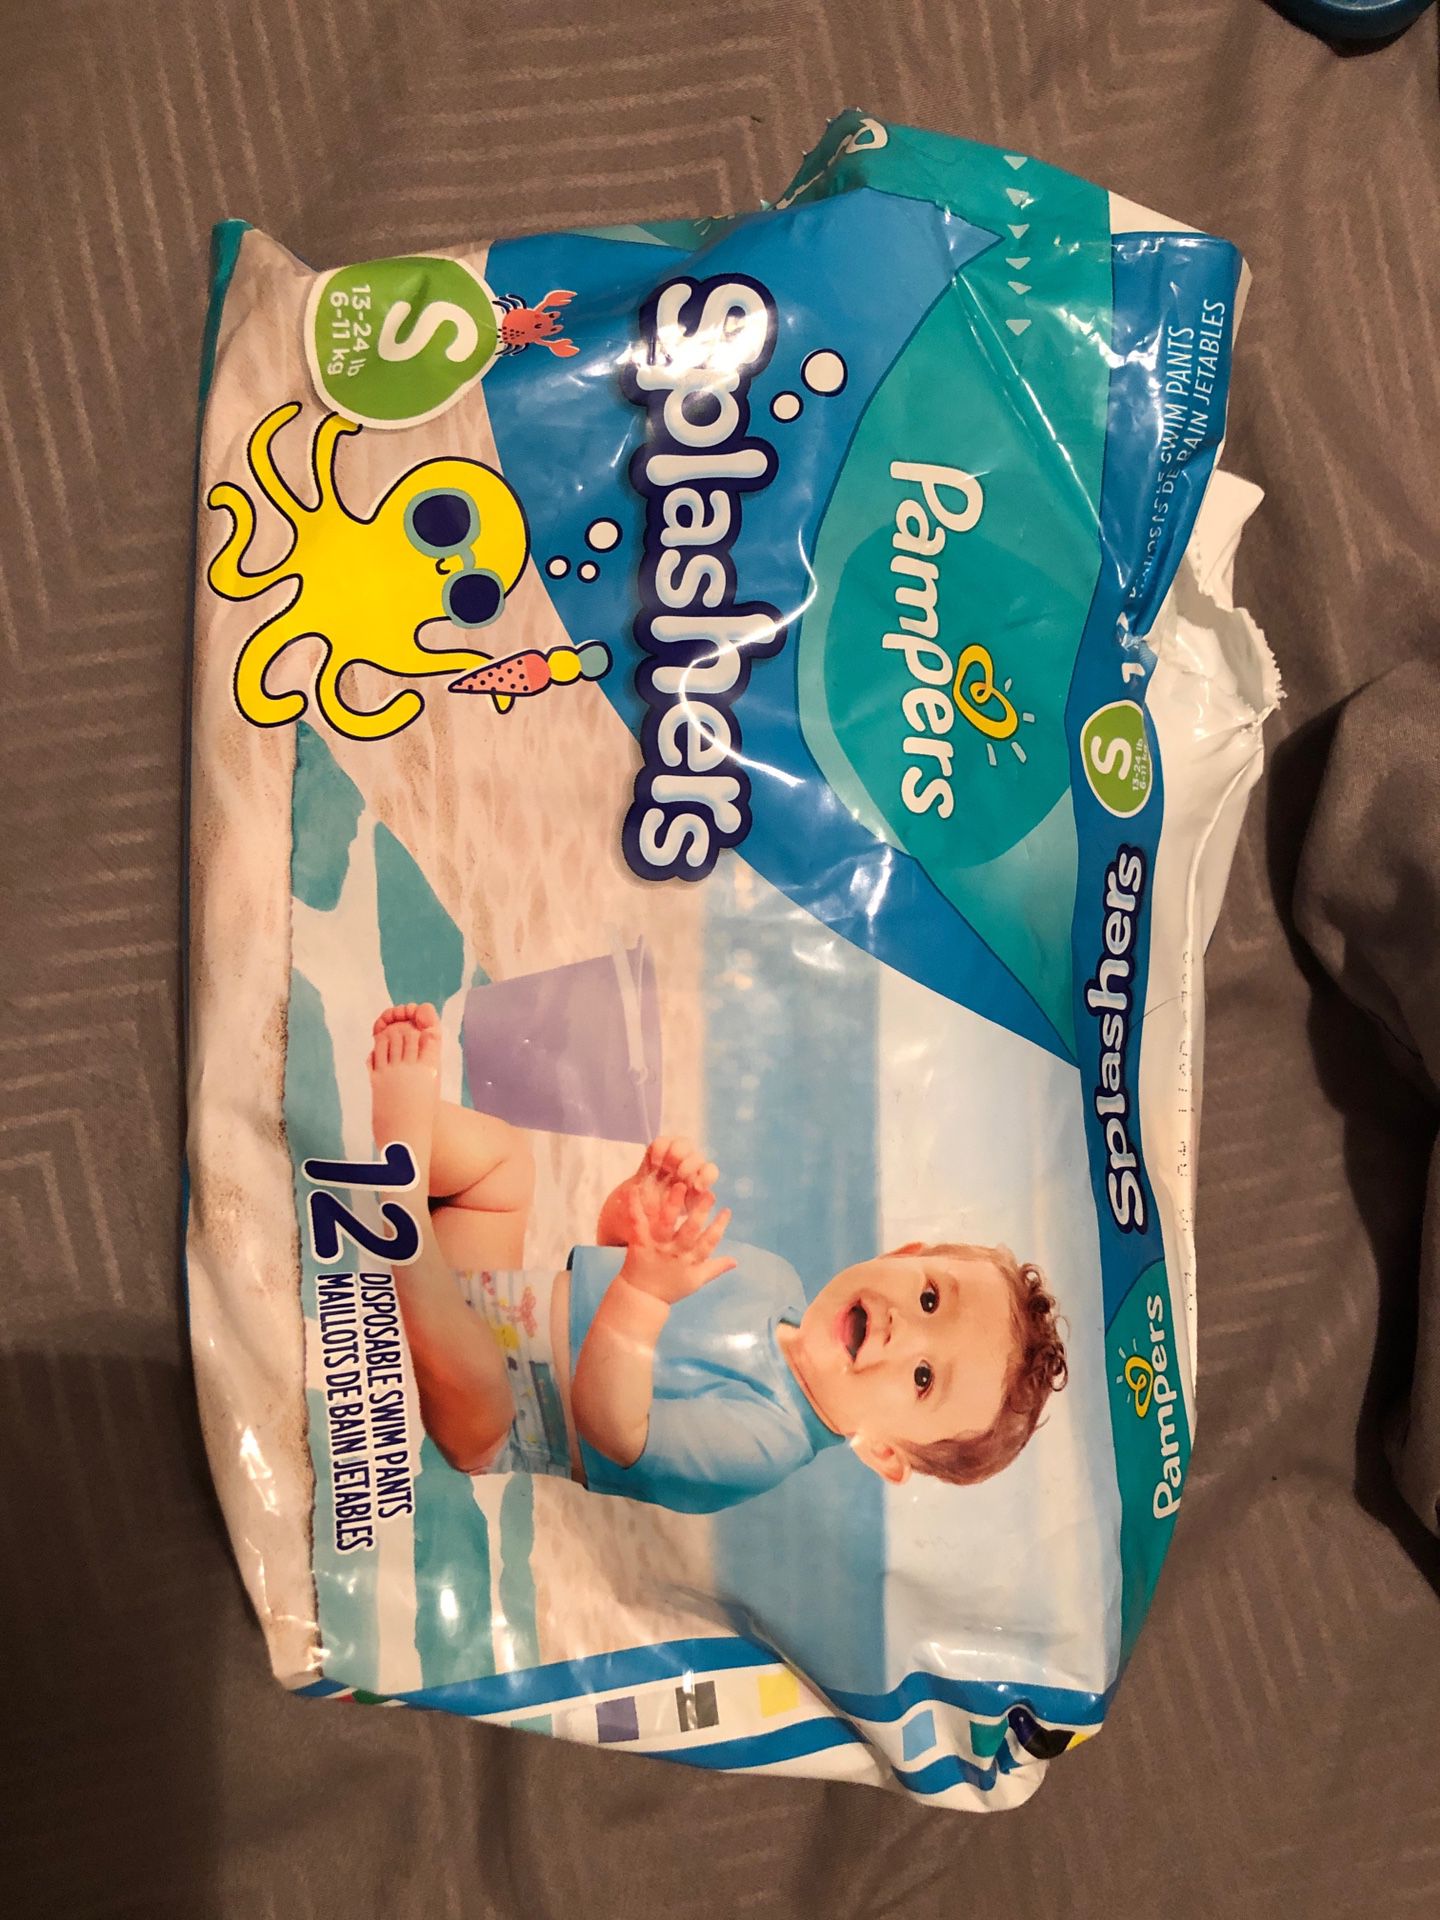 $8 - Pampers Splashers - partial pack of 9 - size S - 13-24 lb